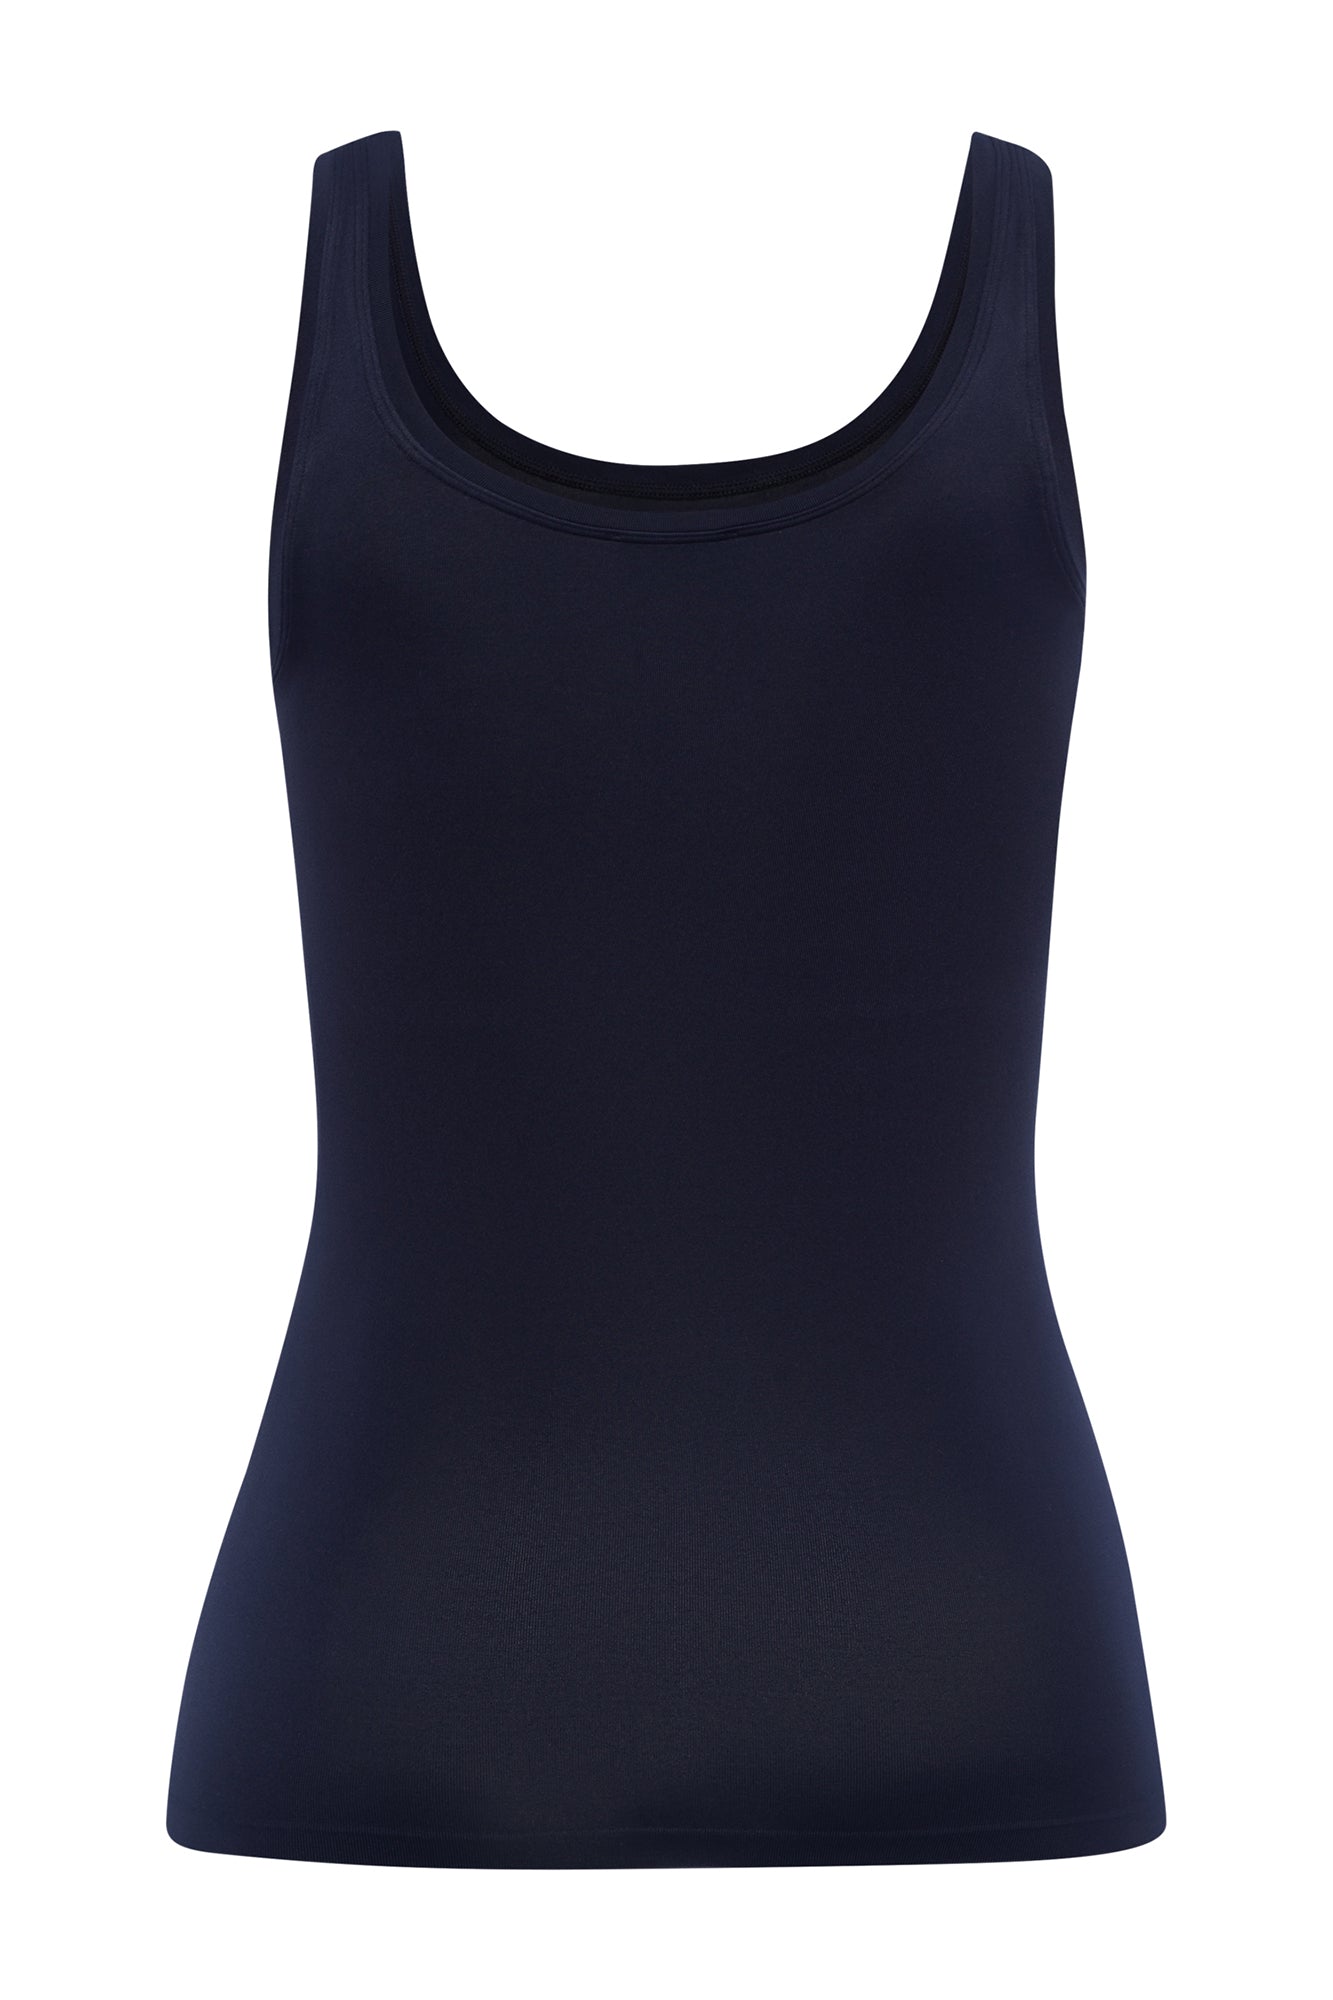 The Touch Feeling Top By HANRO In Deep Navy